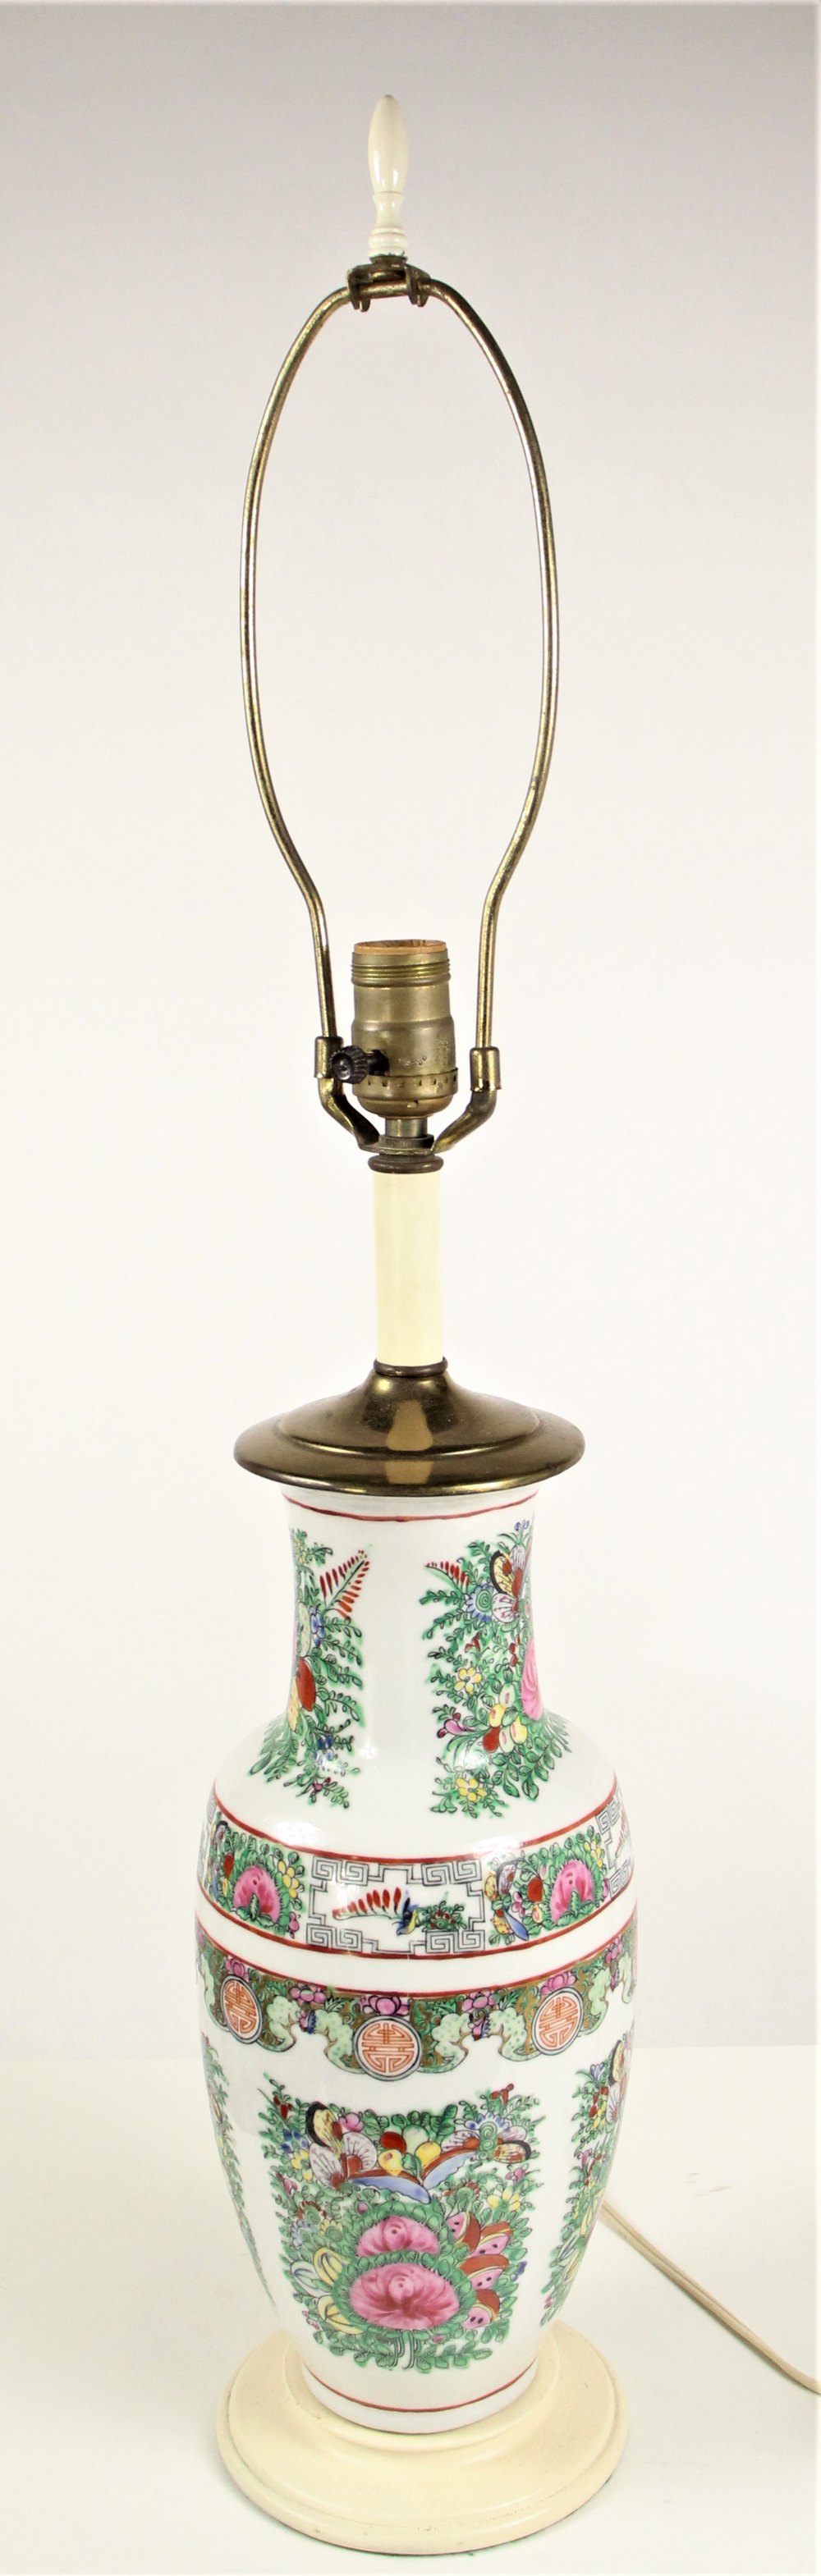 Chinese Hand Painted Lamp - Image 10 of 10